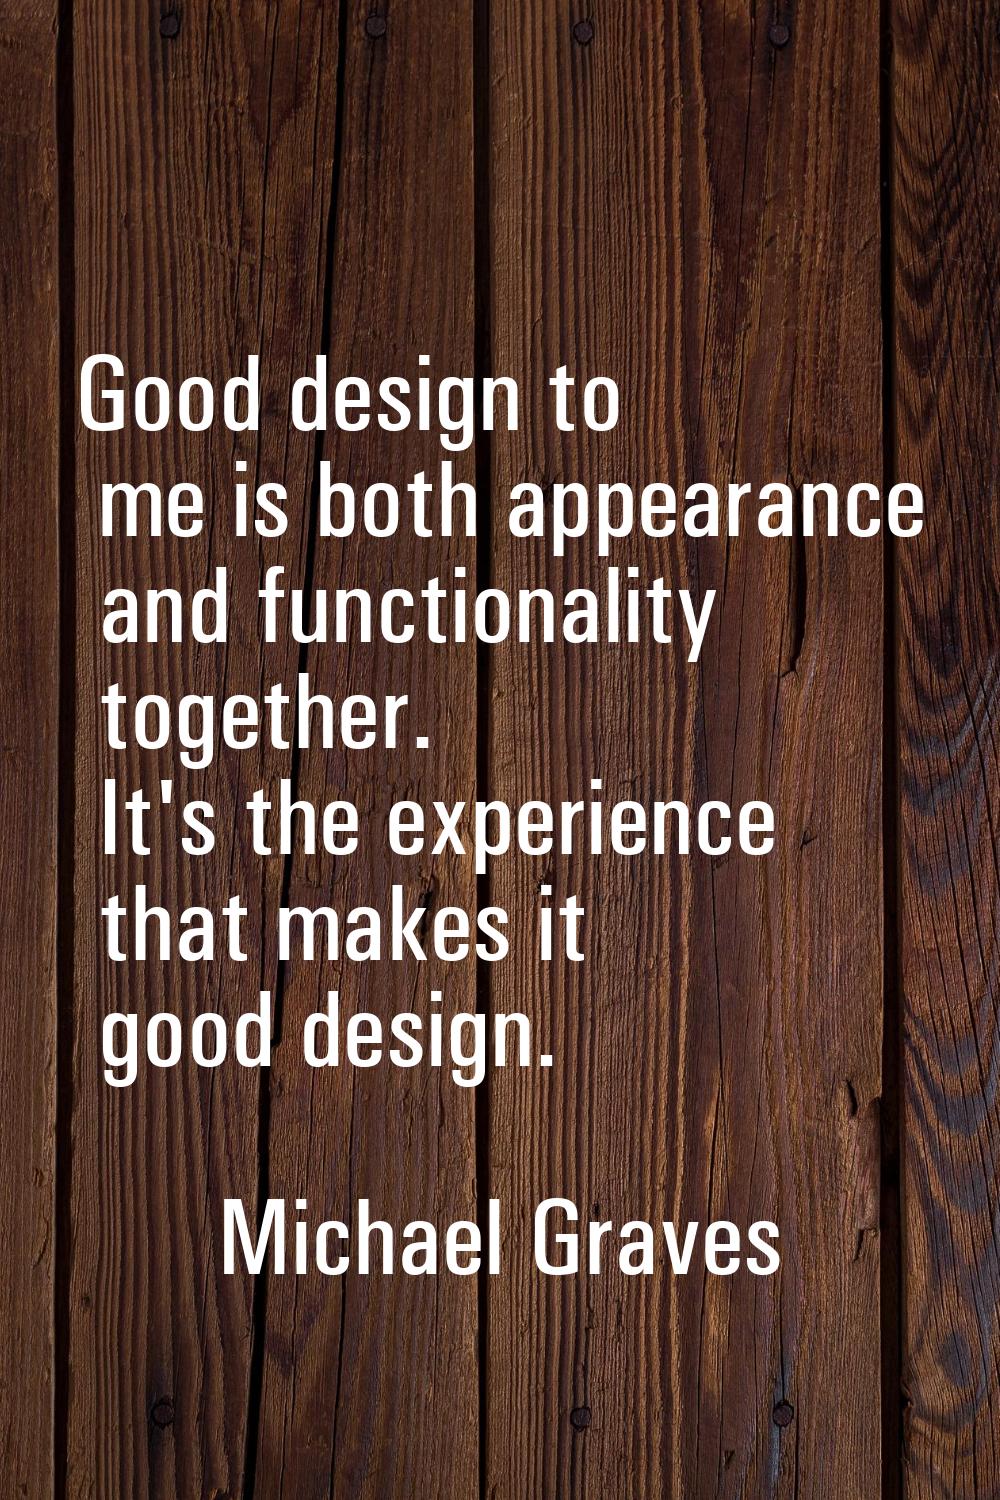 Good design to me is both appearance and functionality together. It's the experience that makes it 